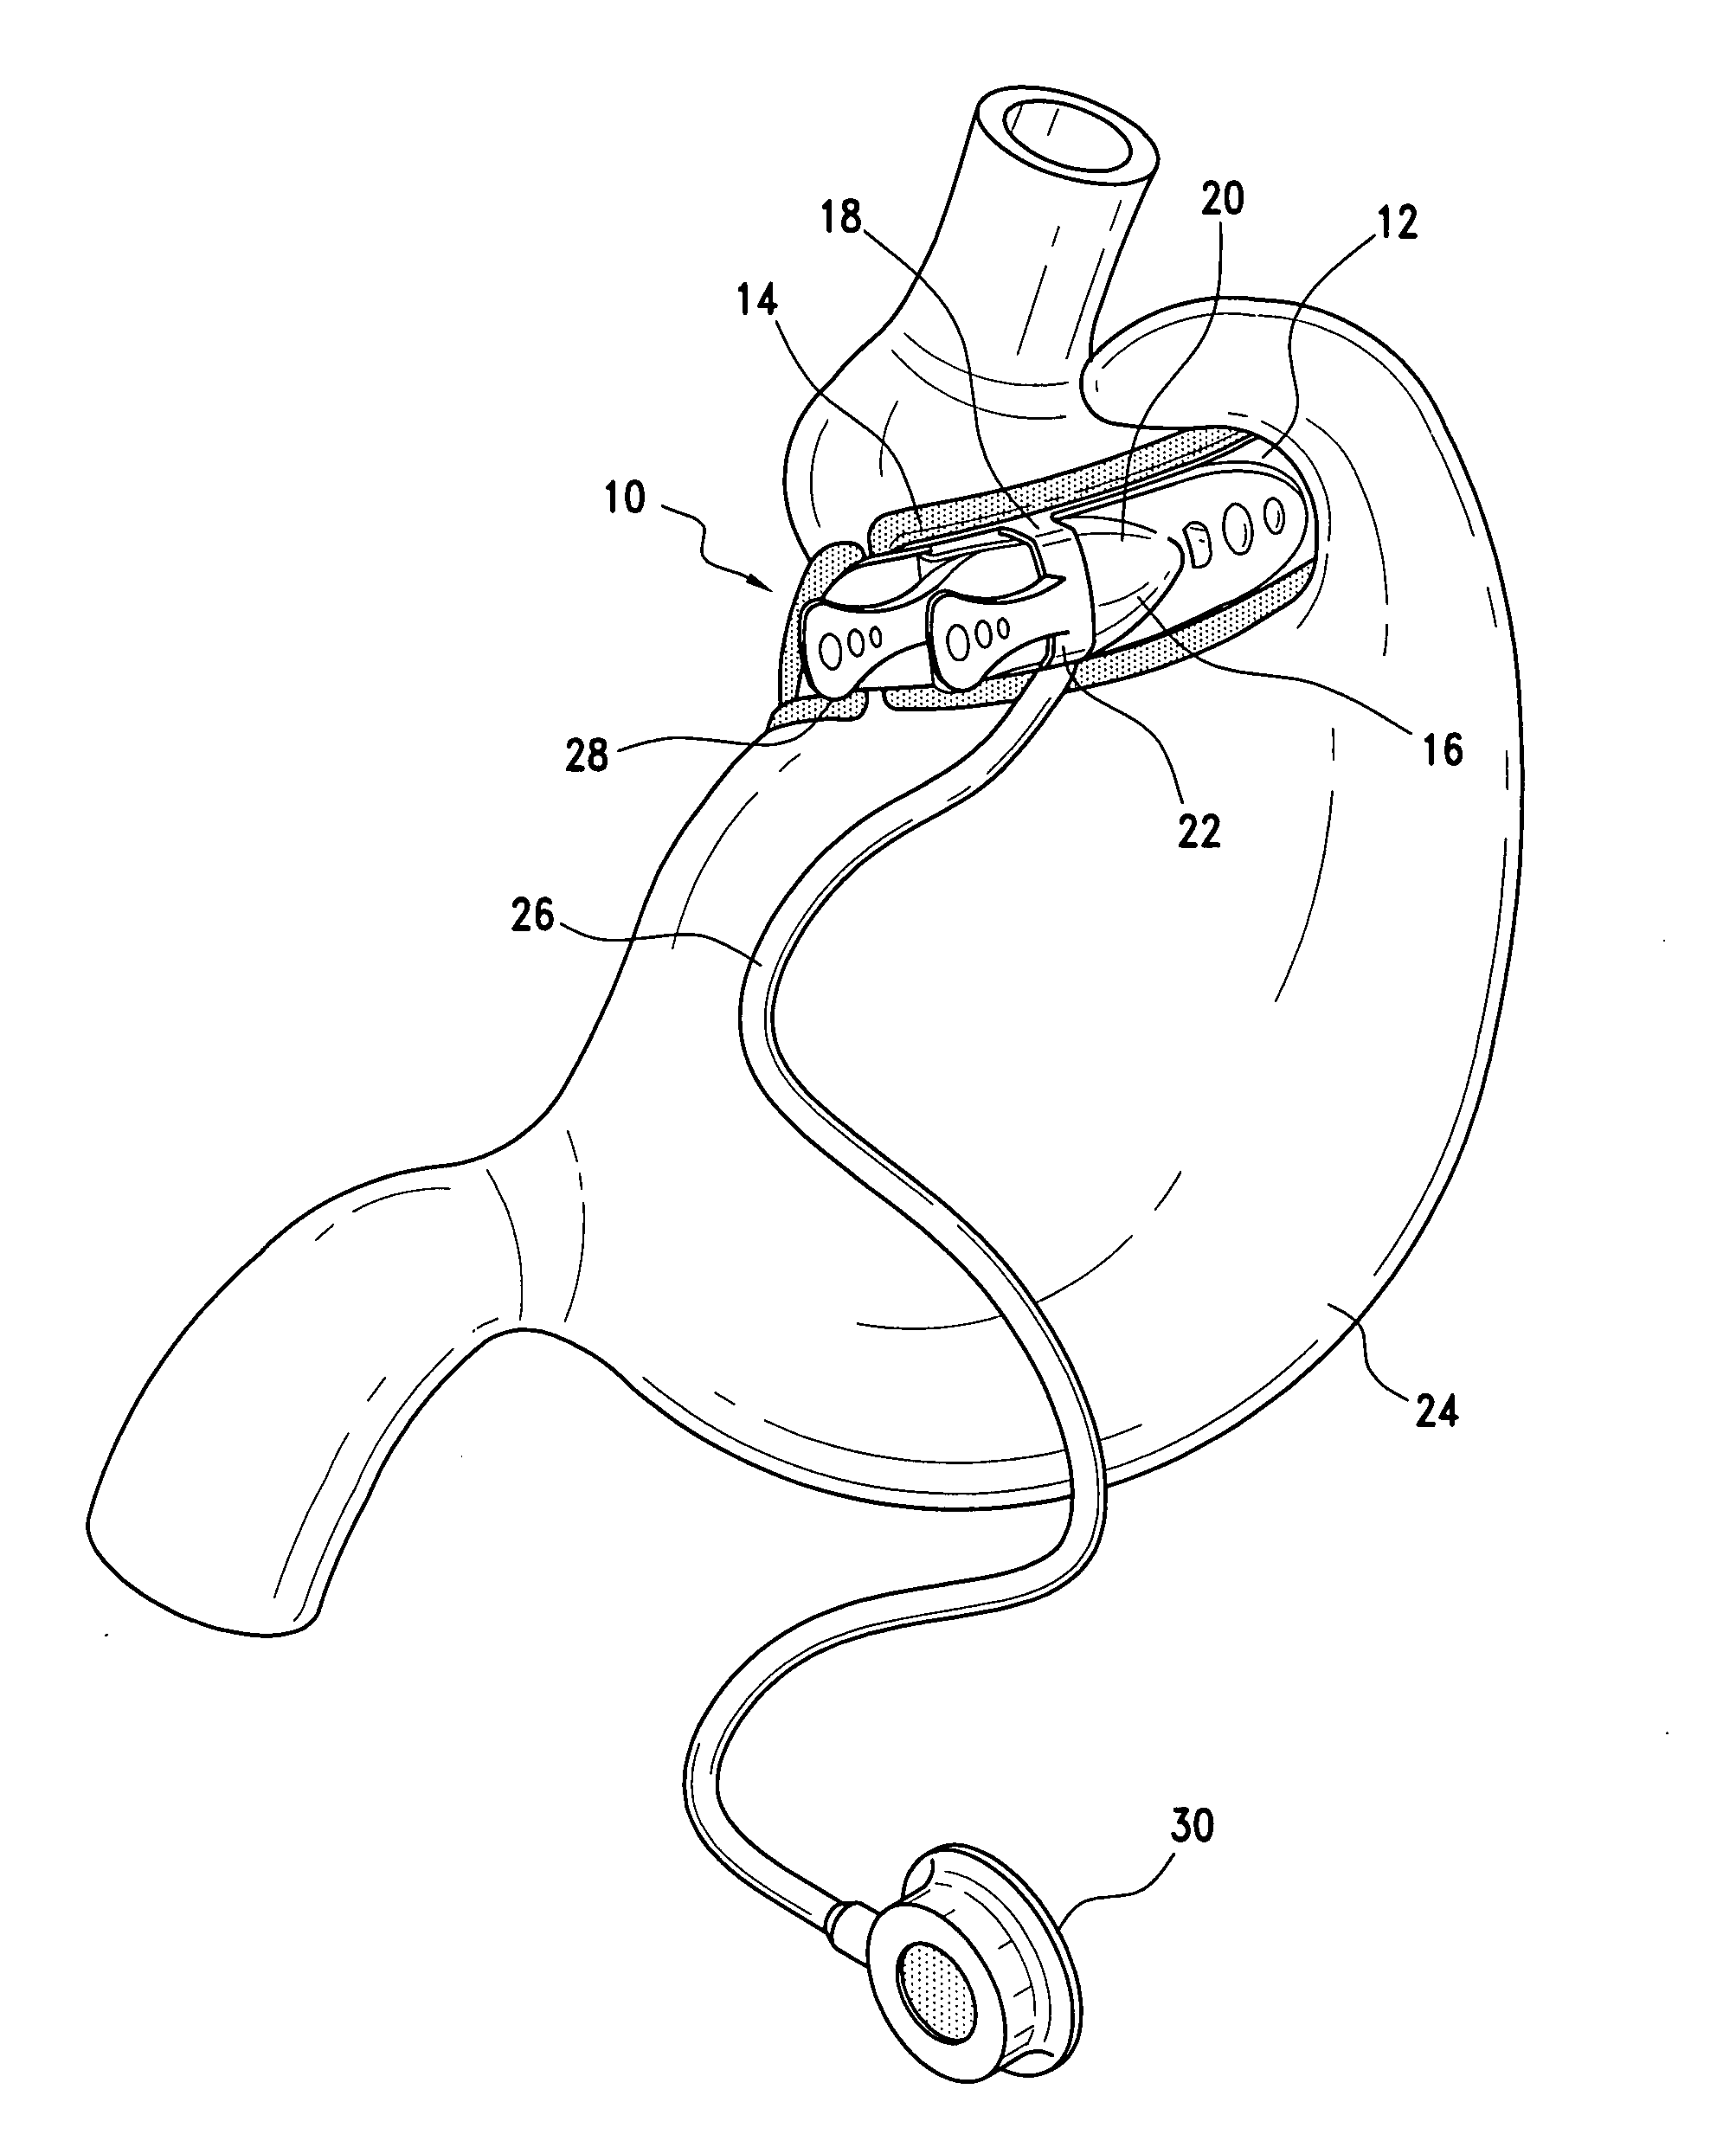 Gastric band with supply tube check valve